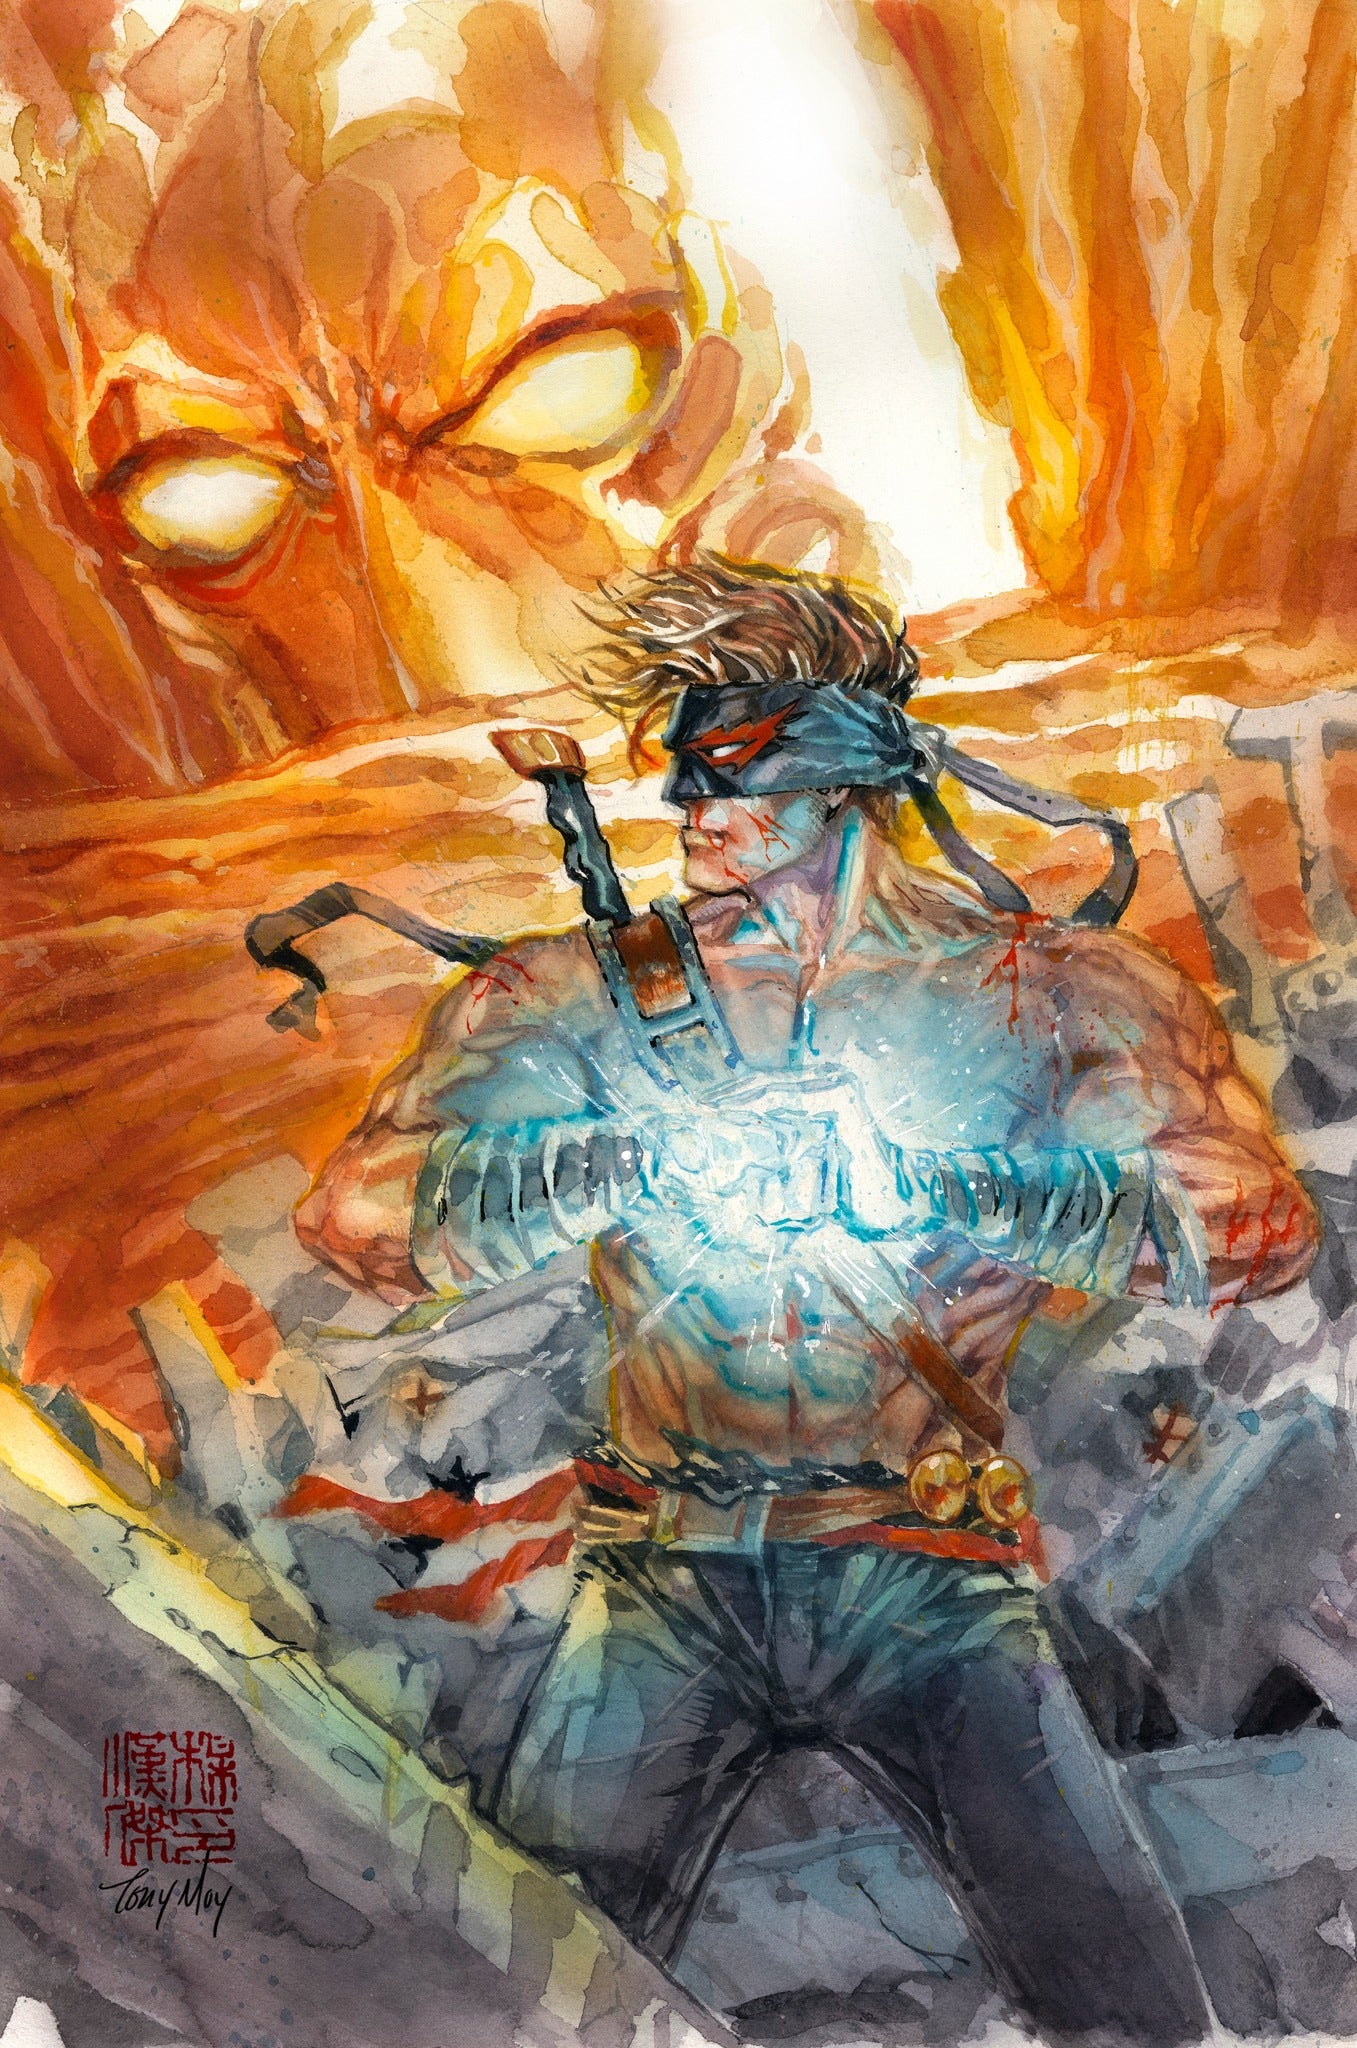 Tyler Kirkham's Final boss #2 Painted cover art by Tony Moy CMC Exclusive!